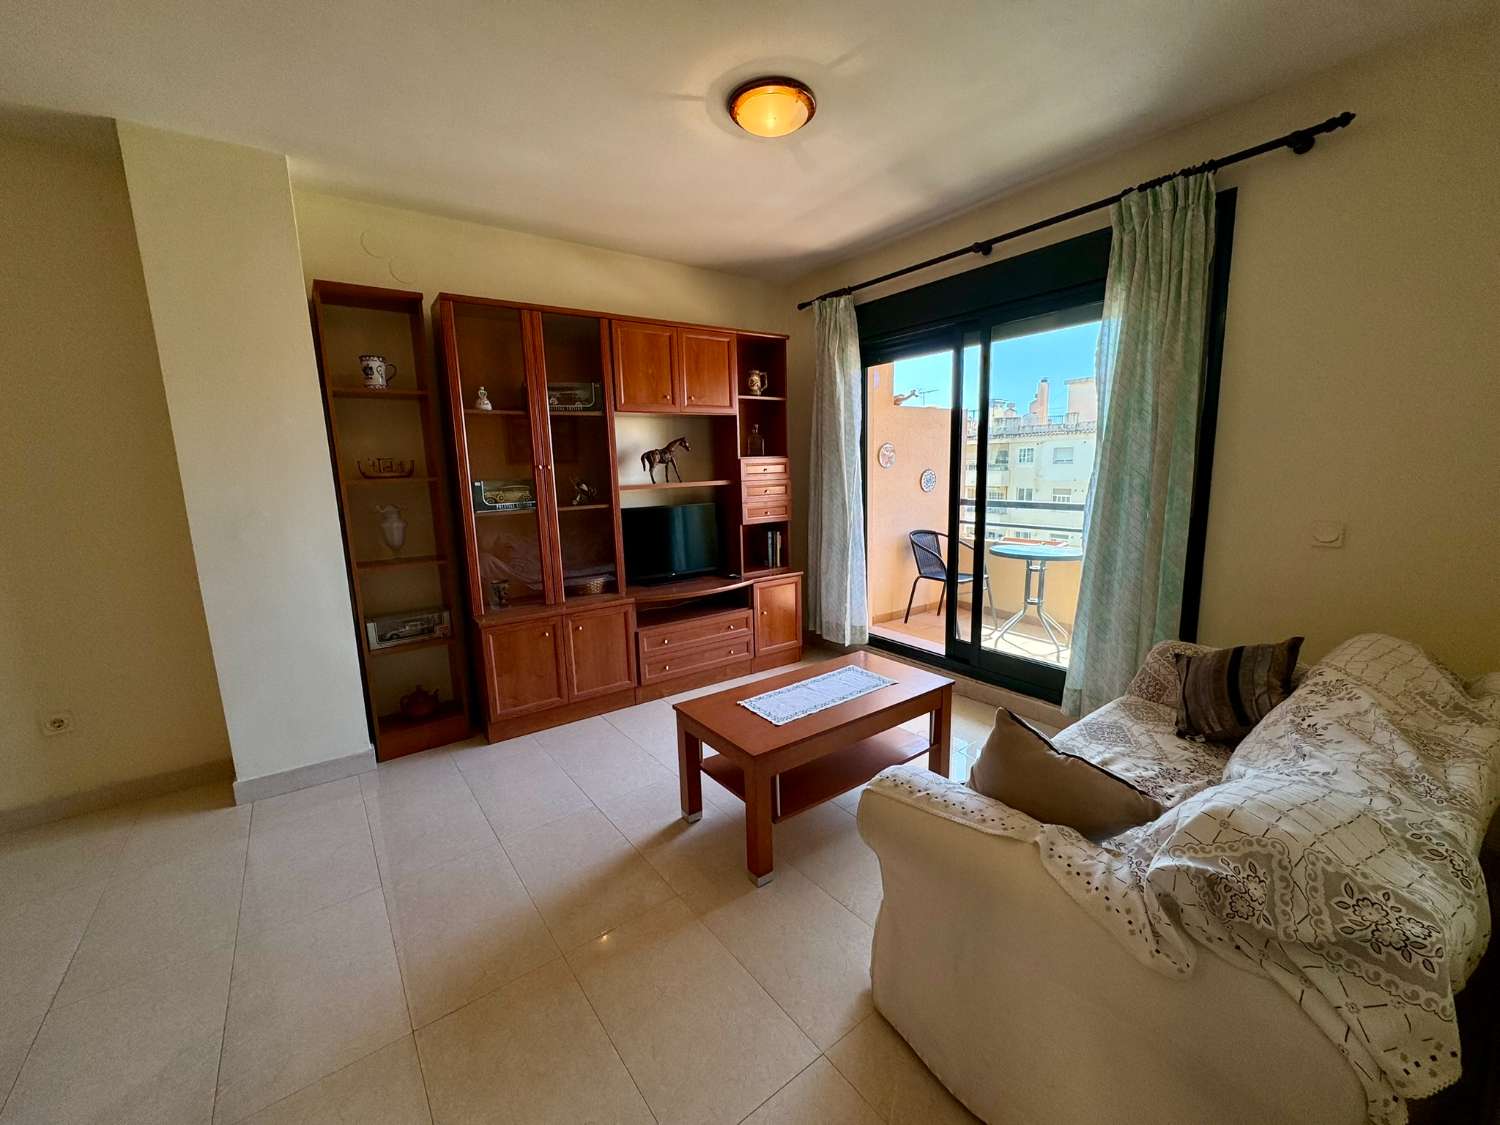 Apartment with 2 bedrooms and 2 private parking spaces in central Nerja